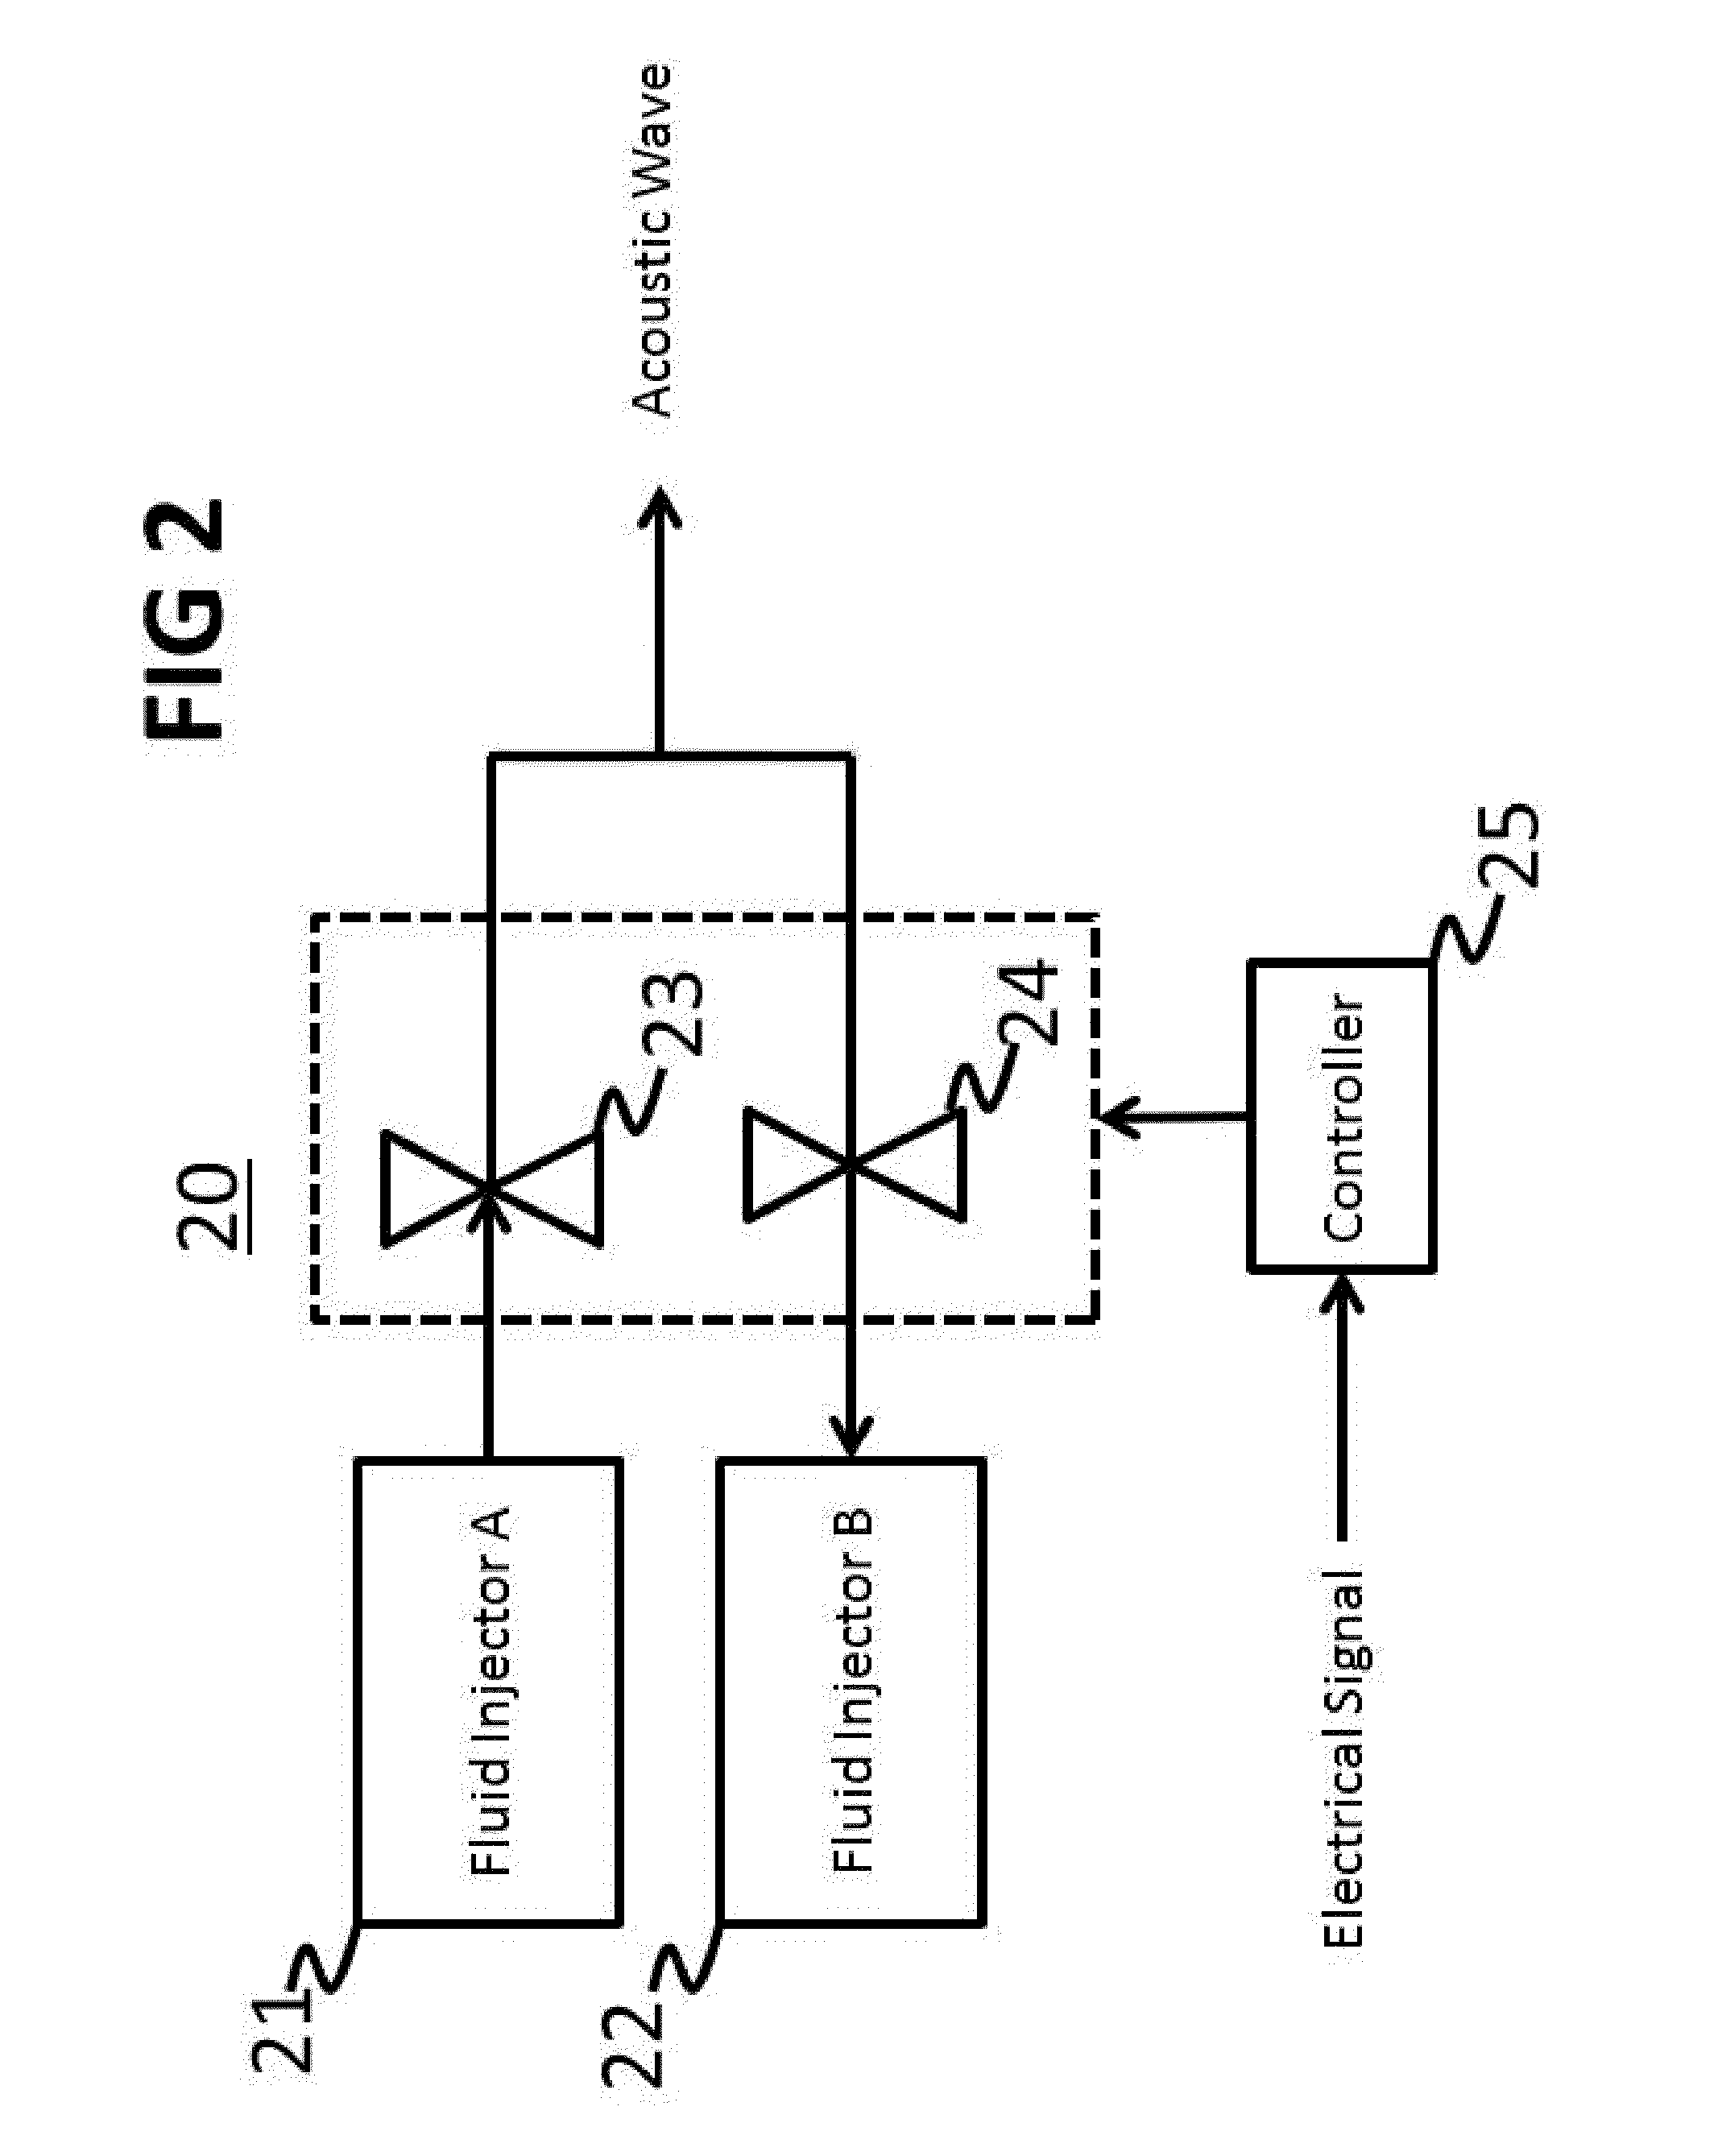 Acoustic wave generator employing fluid injector